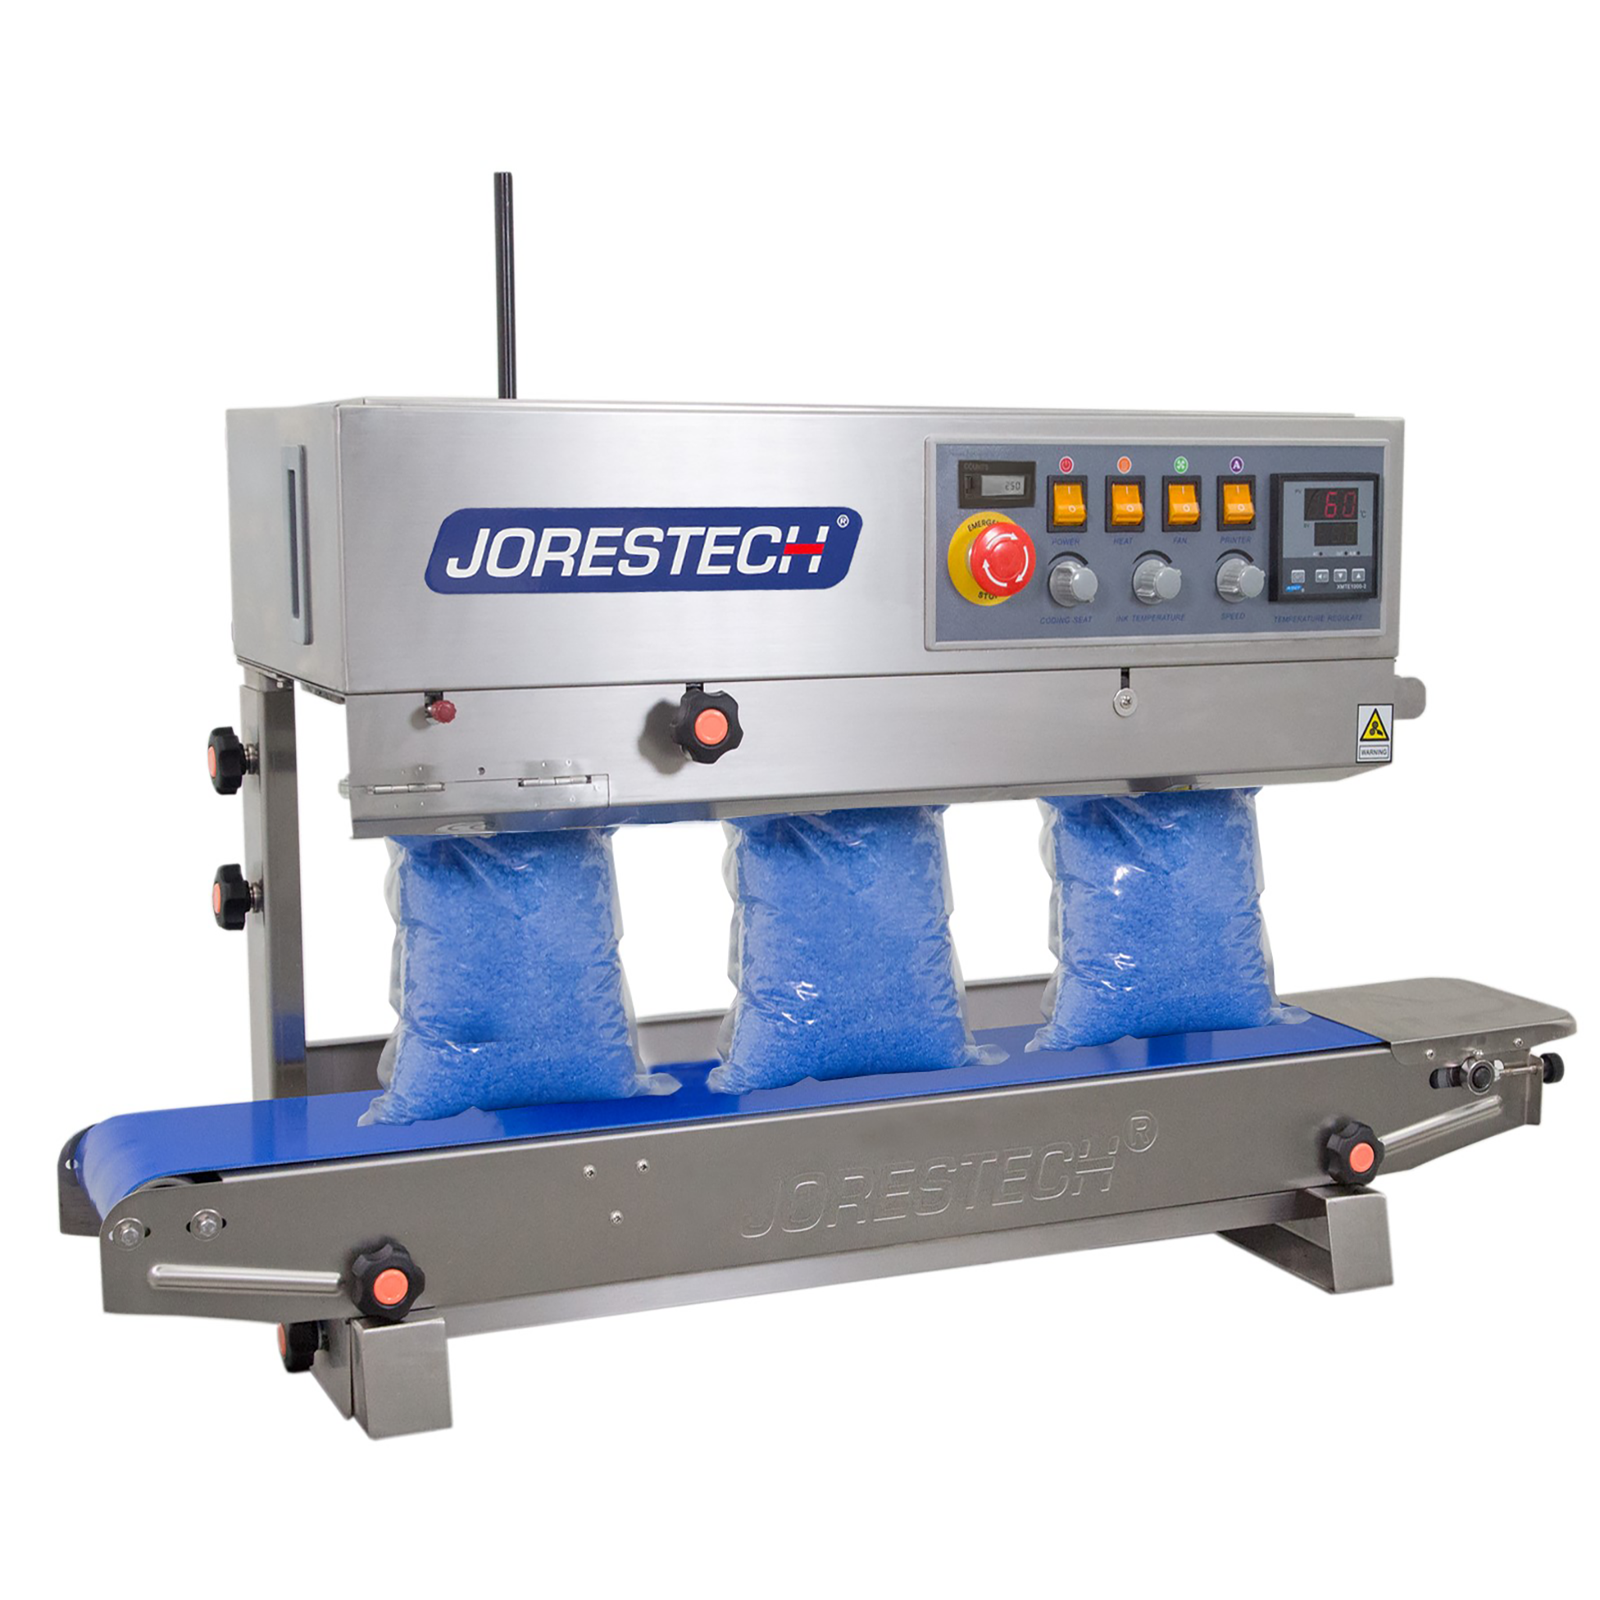 stainless steel JORES TECHNOLOGIES® continuous band sealer sealing several plastic bags filled with blue wax beads